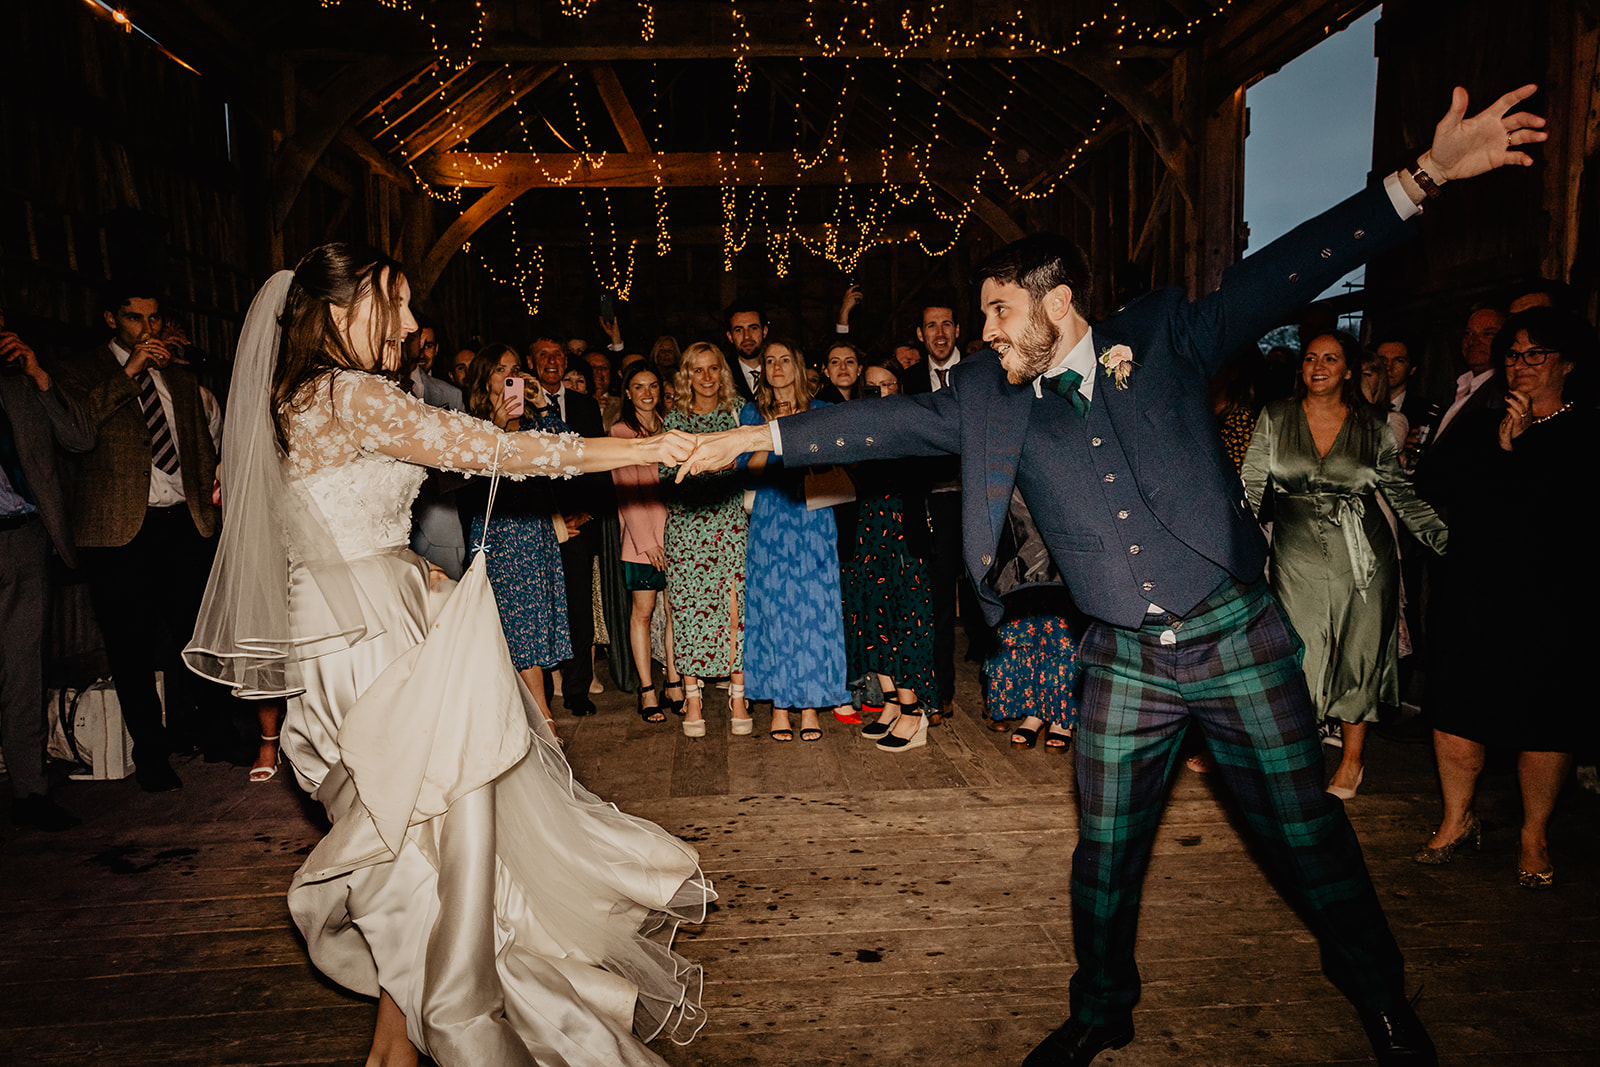 Bride and groom first dance at a Secret Barn Wedding, West Sussex. By Olive Joy Photography